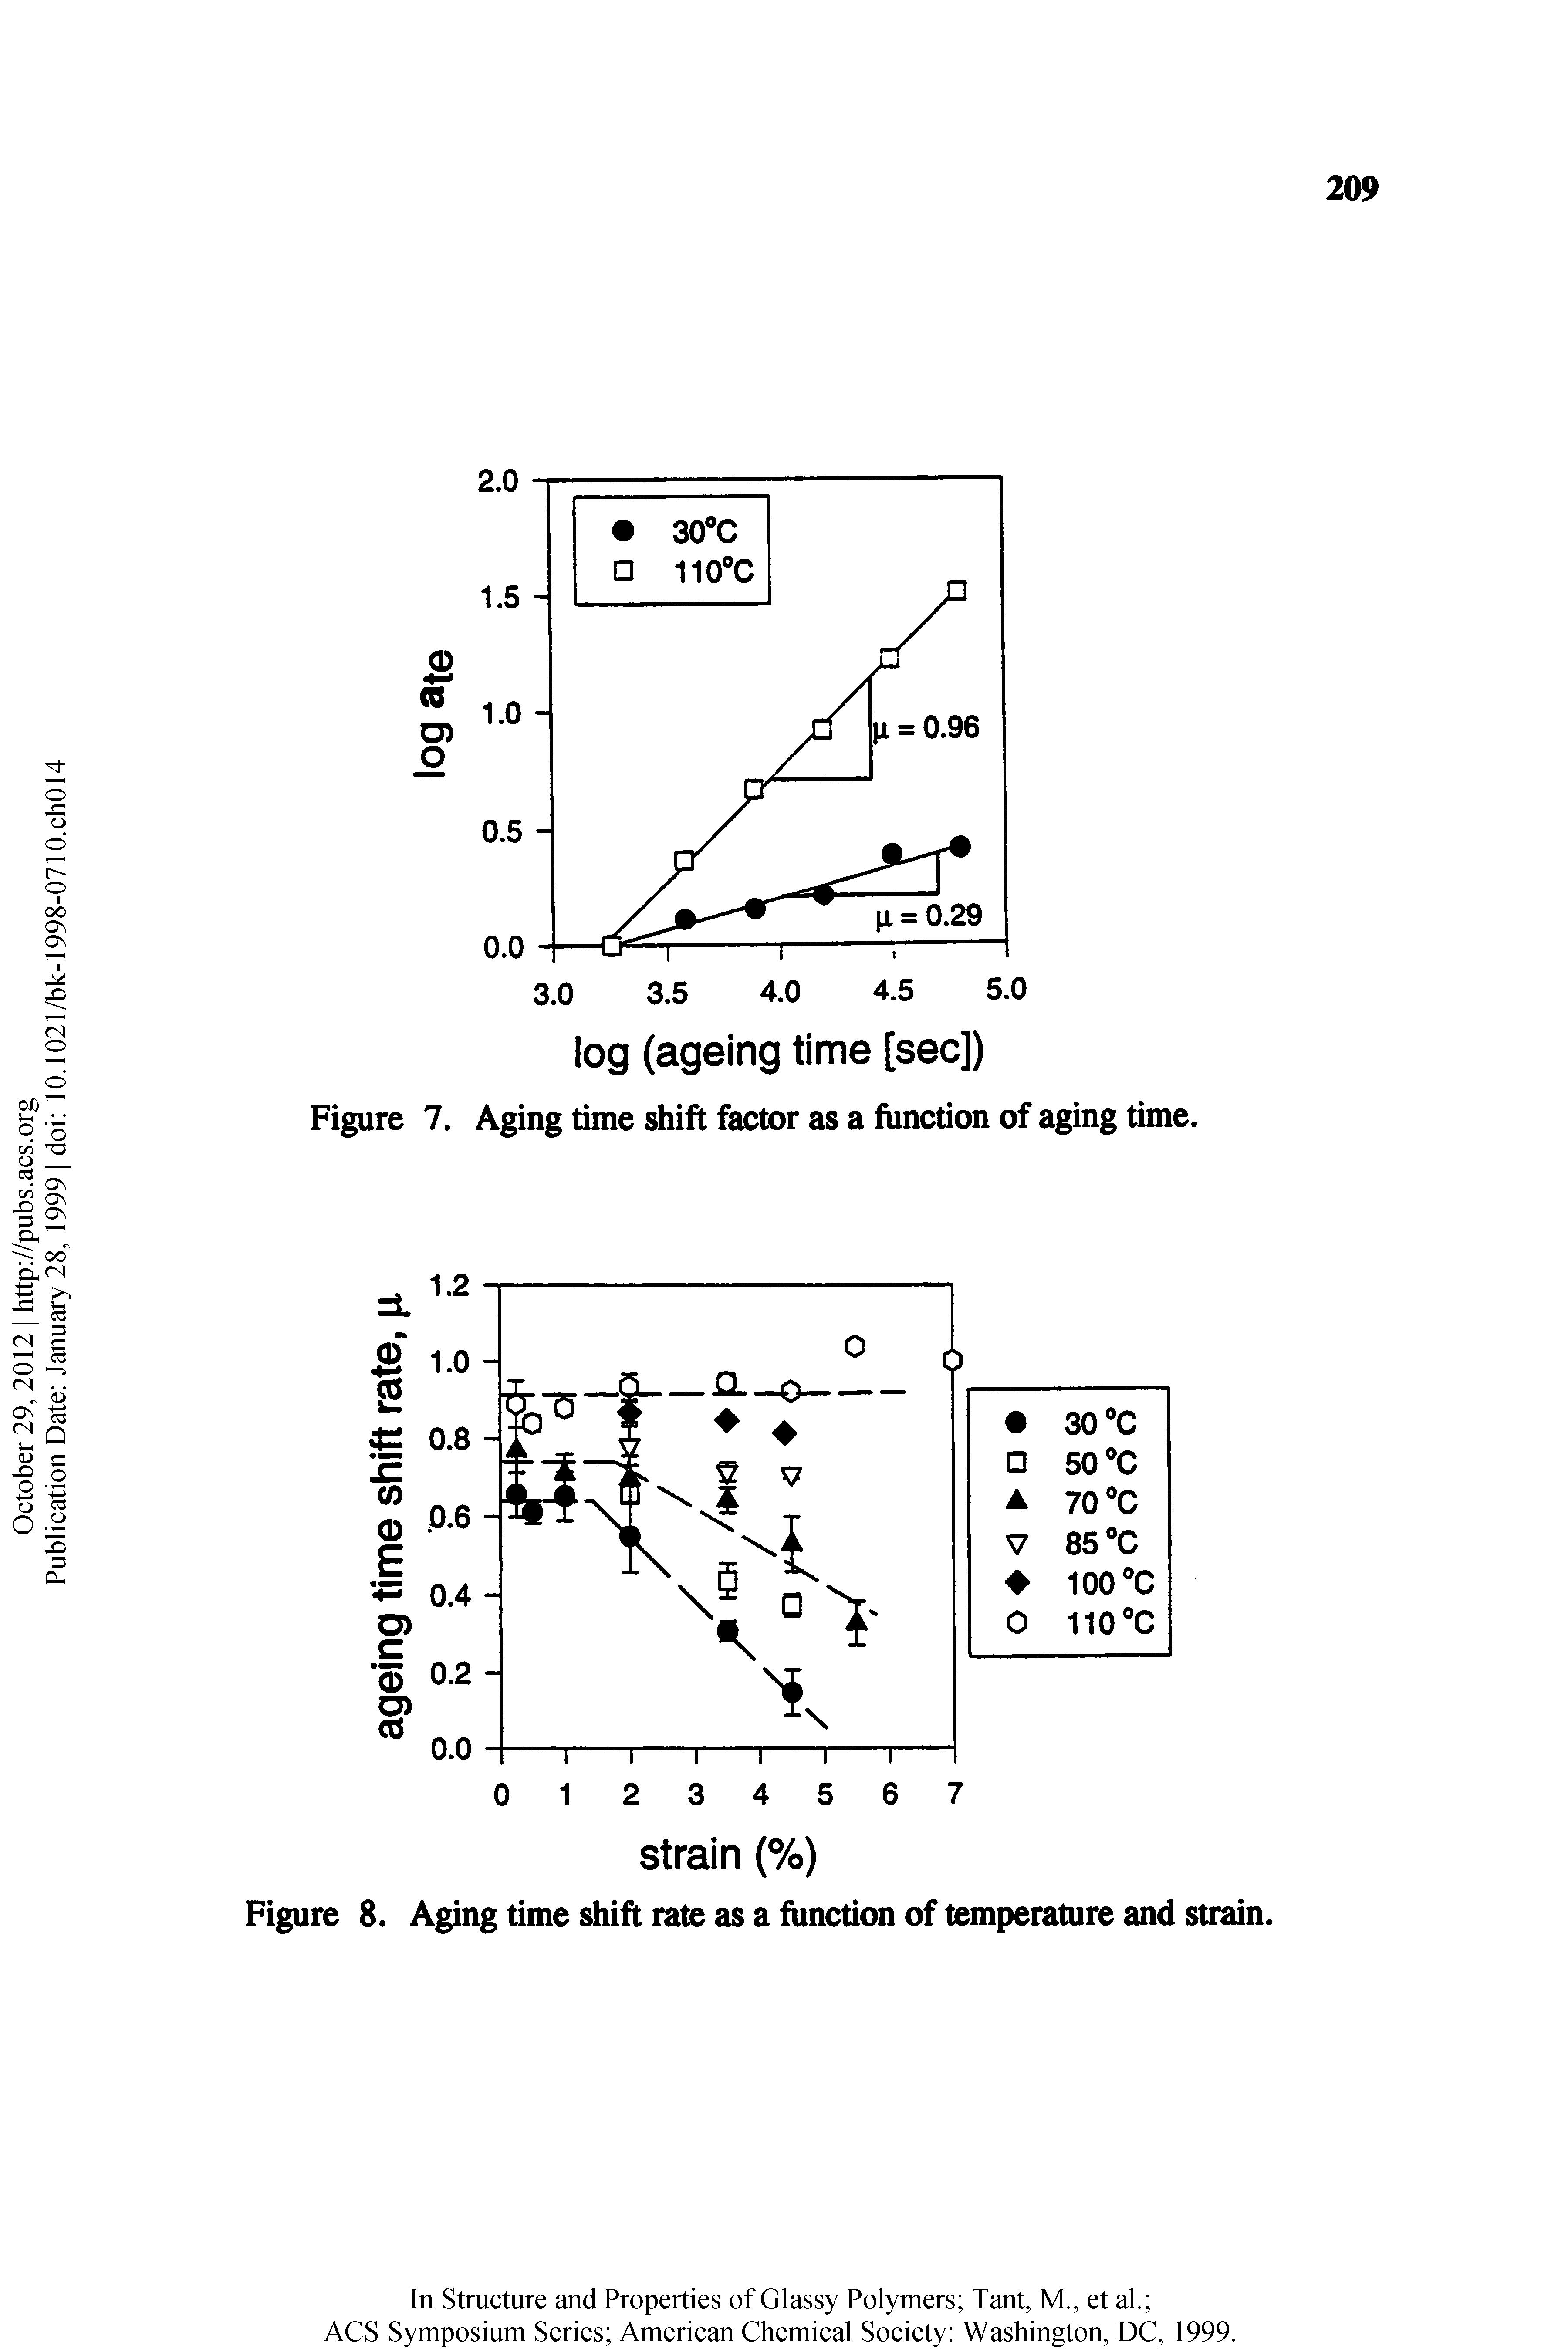 Figure 7. Aging time shift factor as a function of aging time.